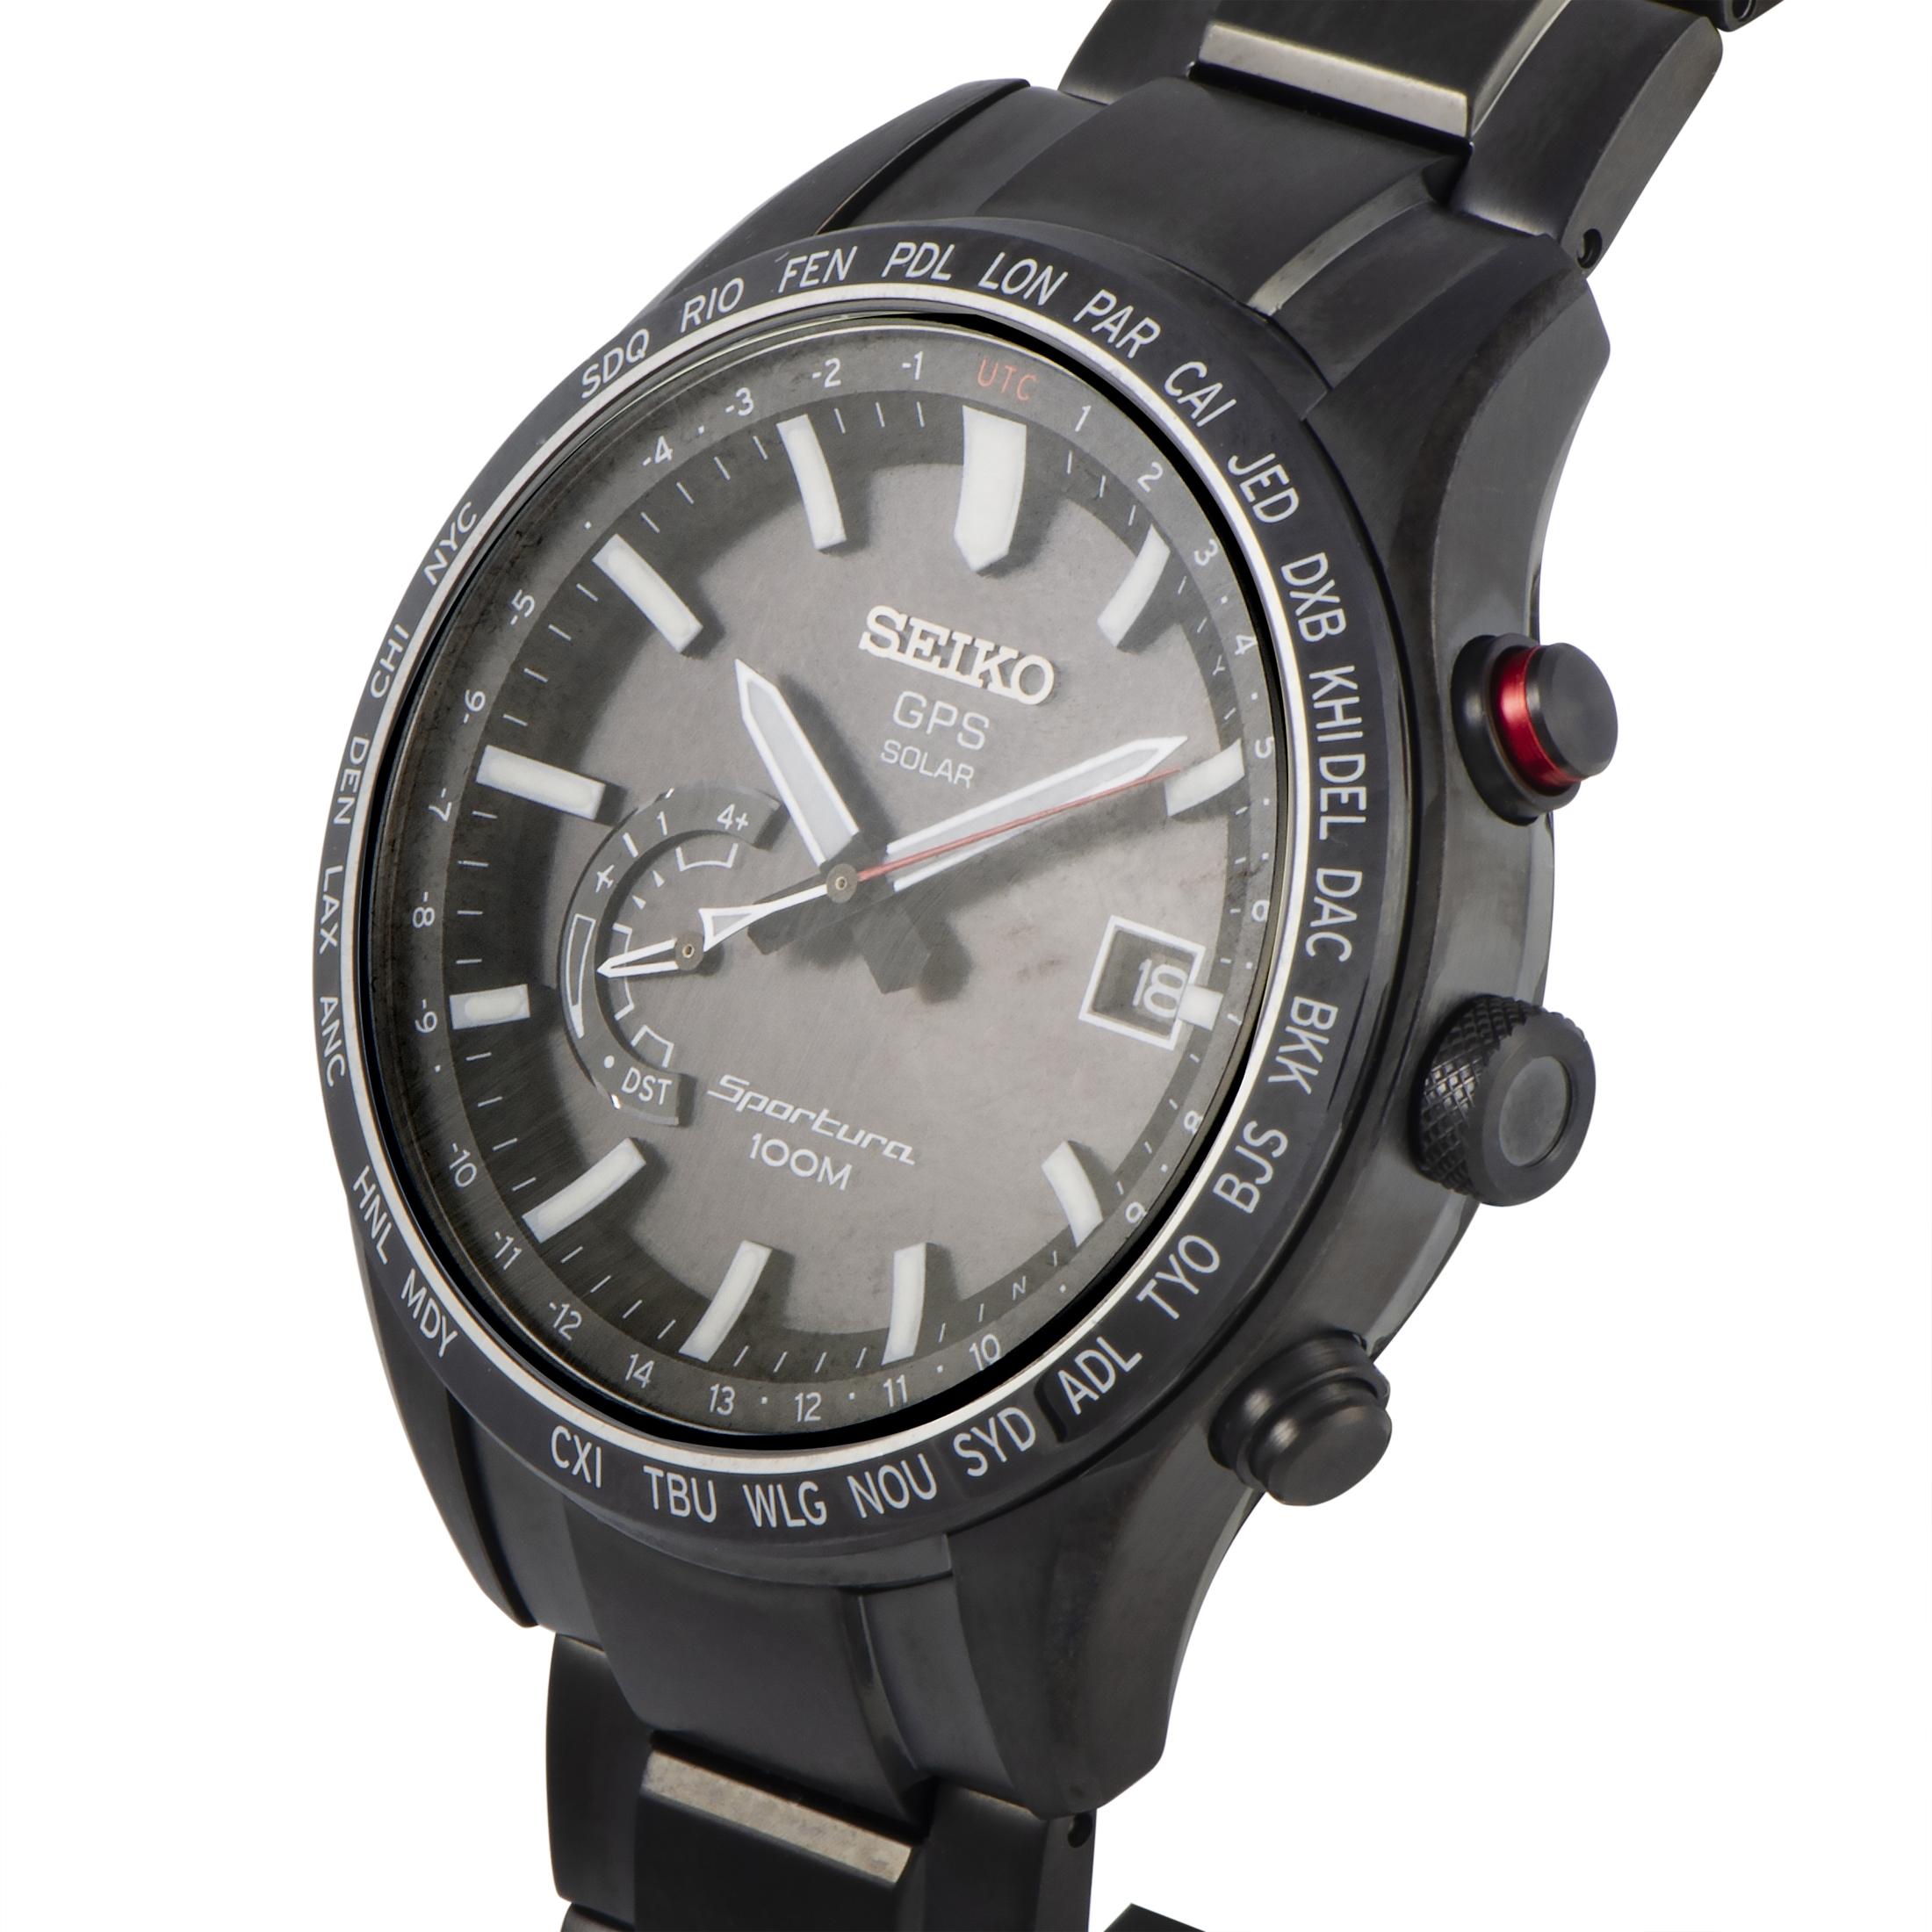 This is the Seiko Sportura GPS Solar, reference number SSF005.

The watch boasts a black stainless steel case fitted with a ceramic bezel and offers water resistance of 100 meters. Equipped with a quartz movement powered by sunlight, this model